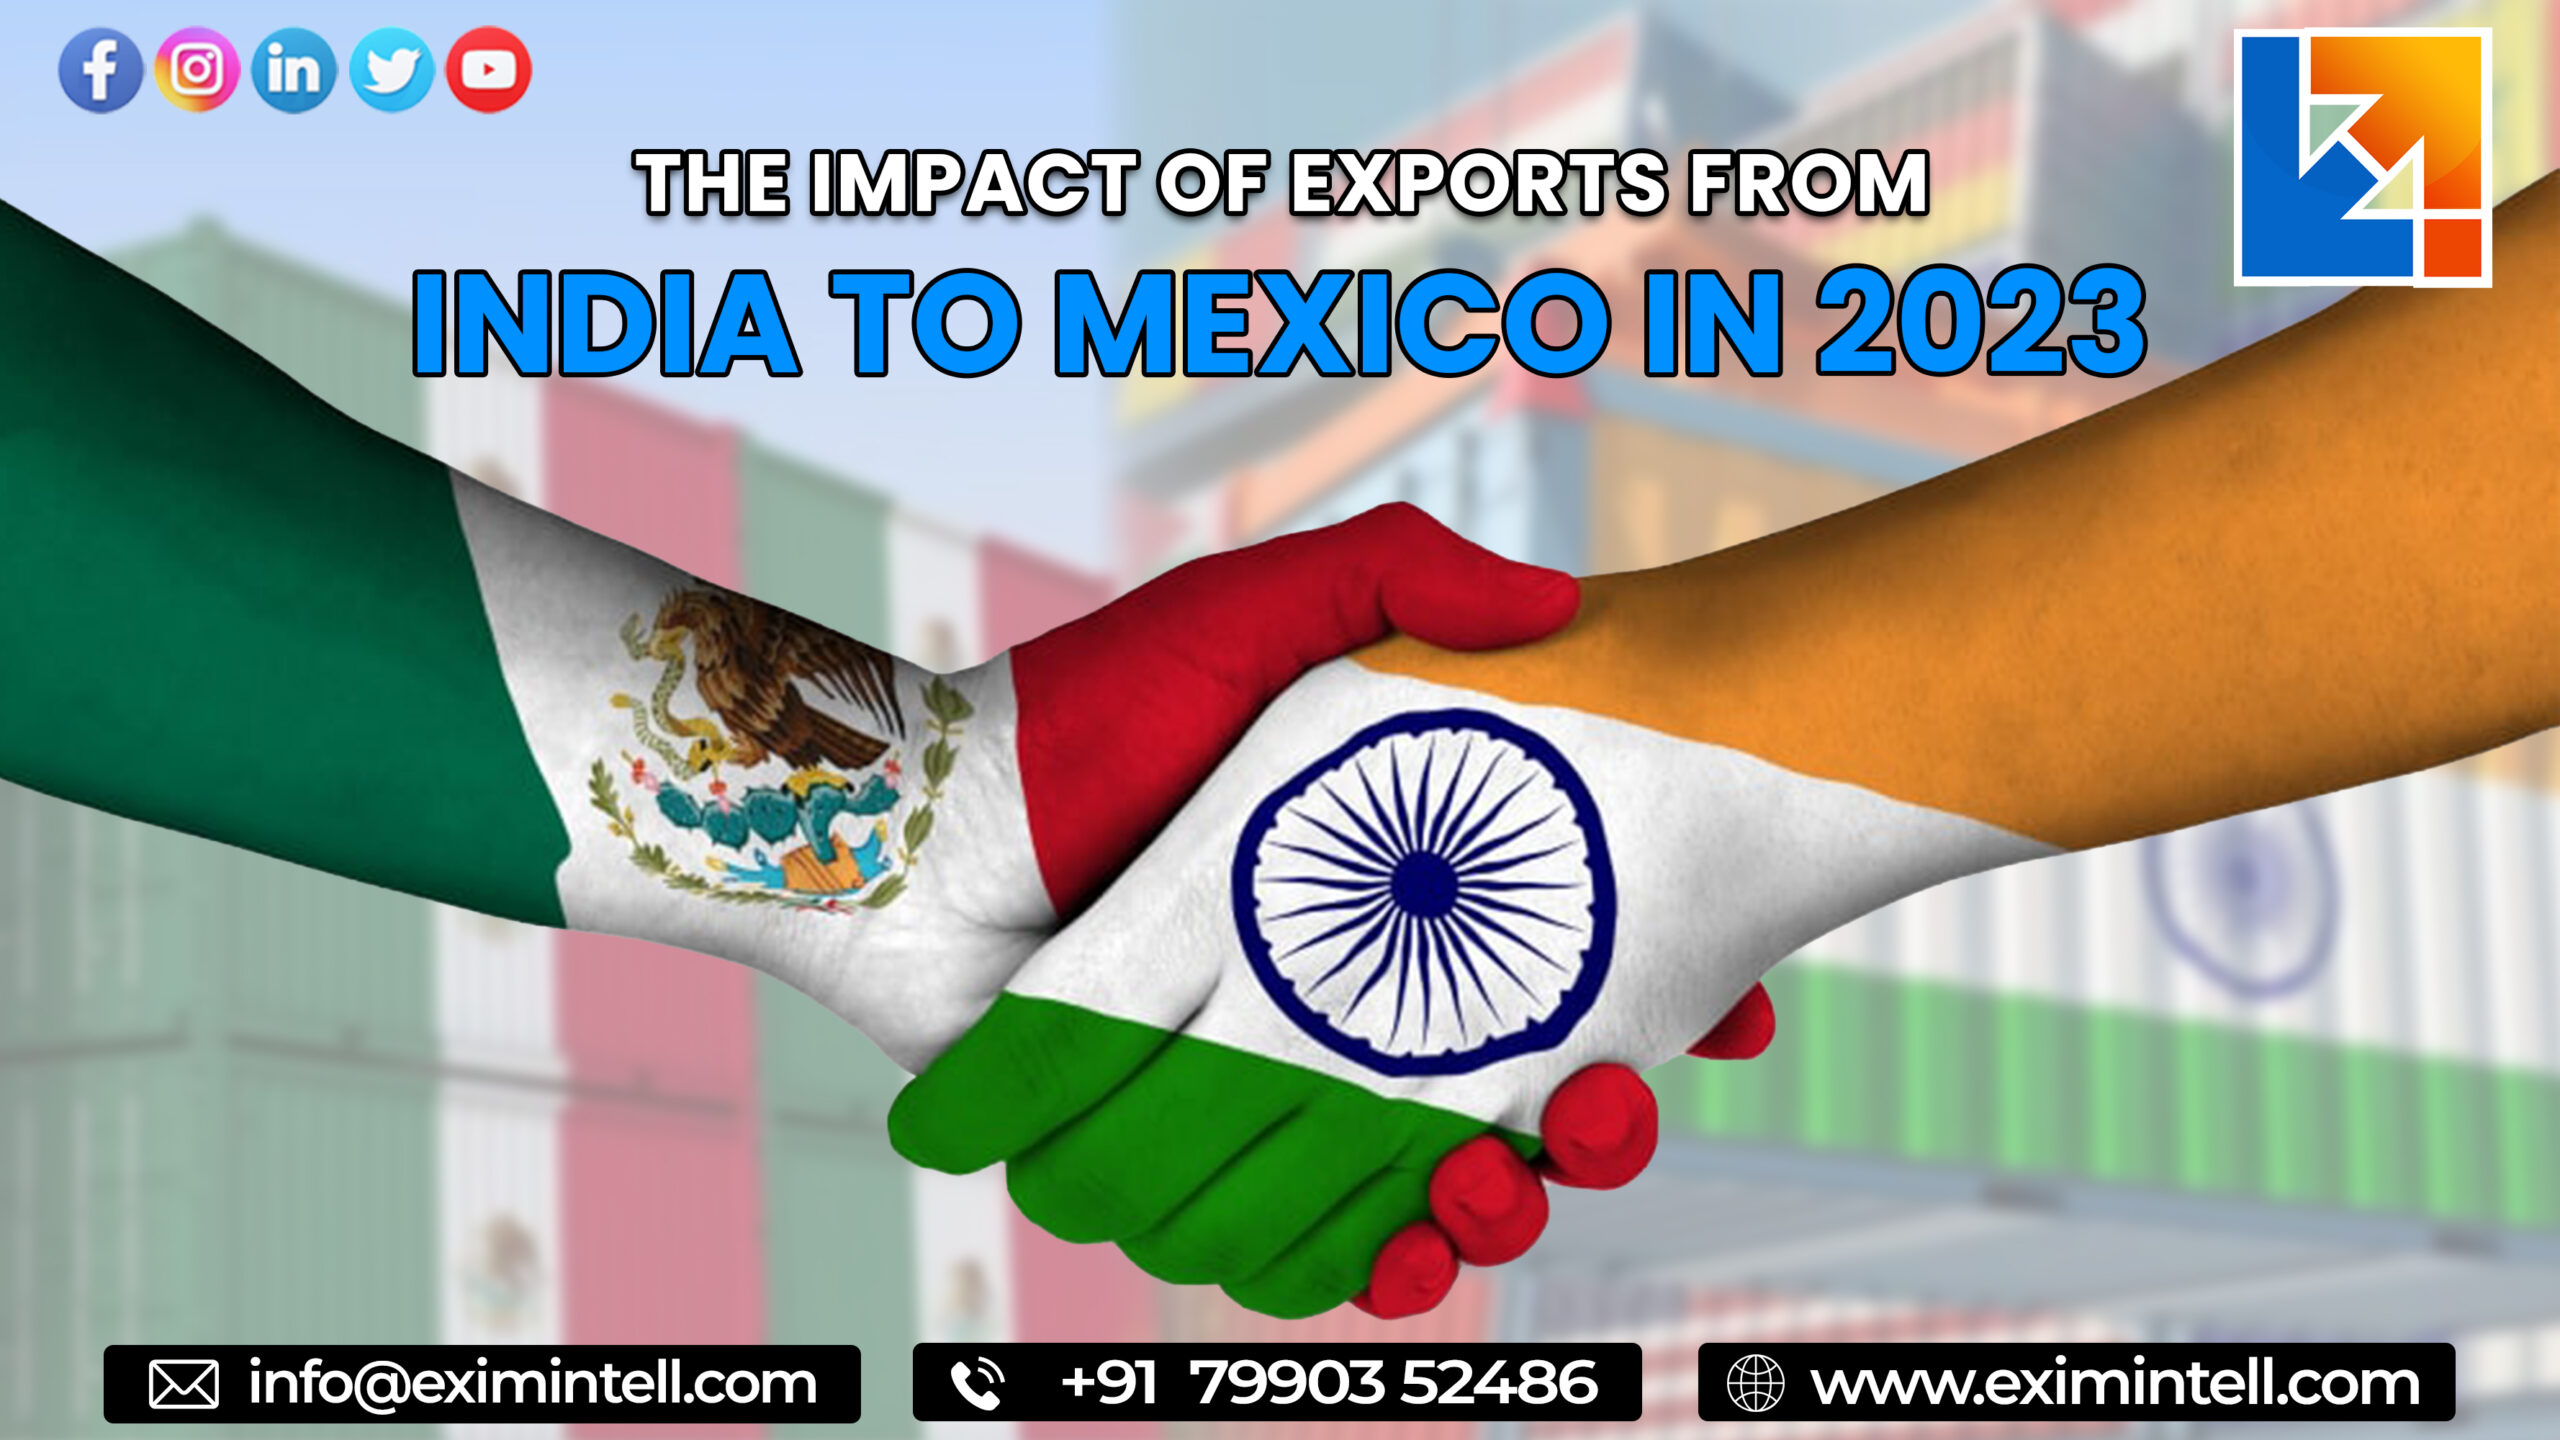 The Impact of Exports from India to Mexico in 2023